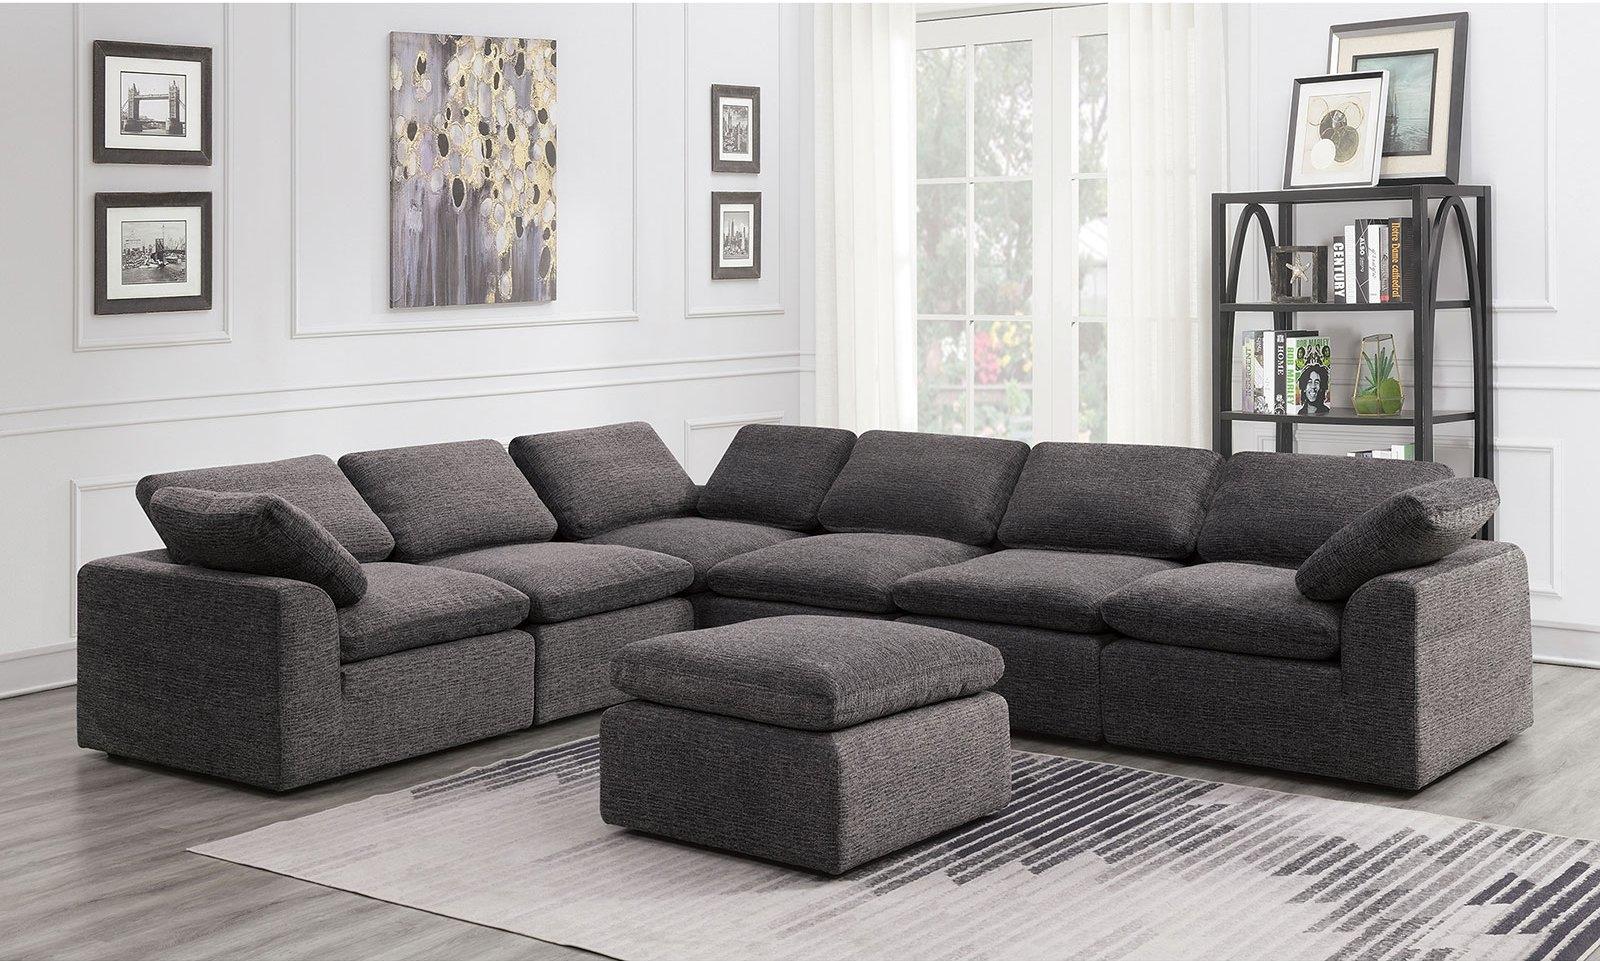 Contemporary Sectional Sofa CM6974GY-6SEAT Joel CM6974GY-6SEAT in Gray Chenille